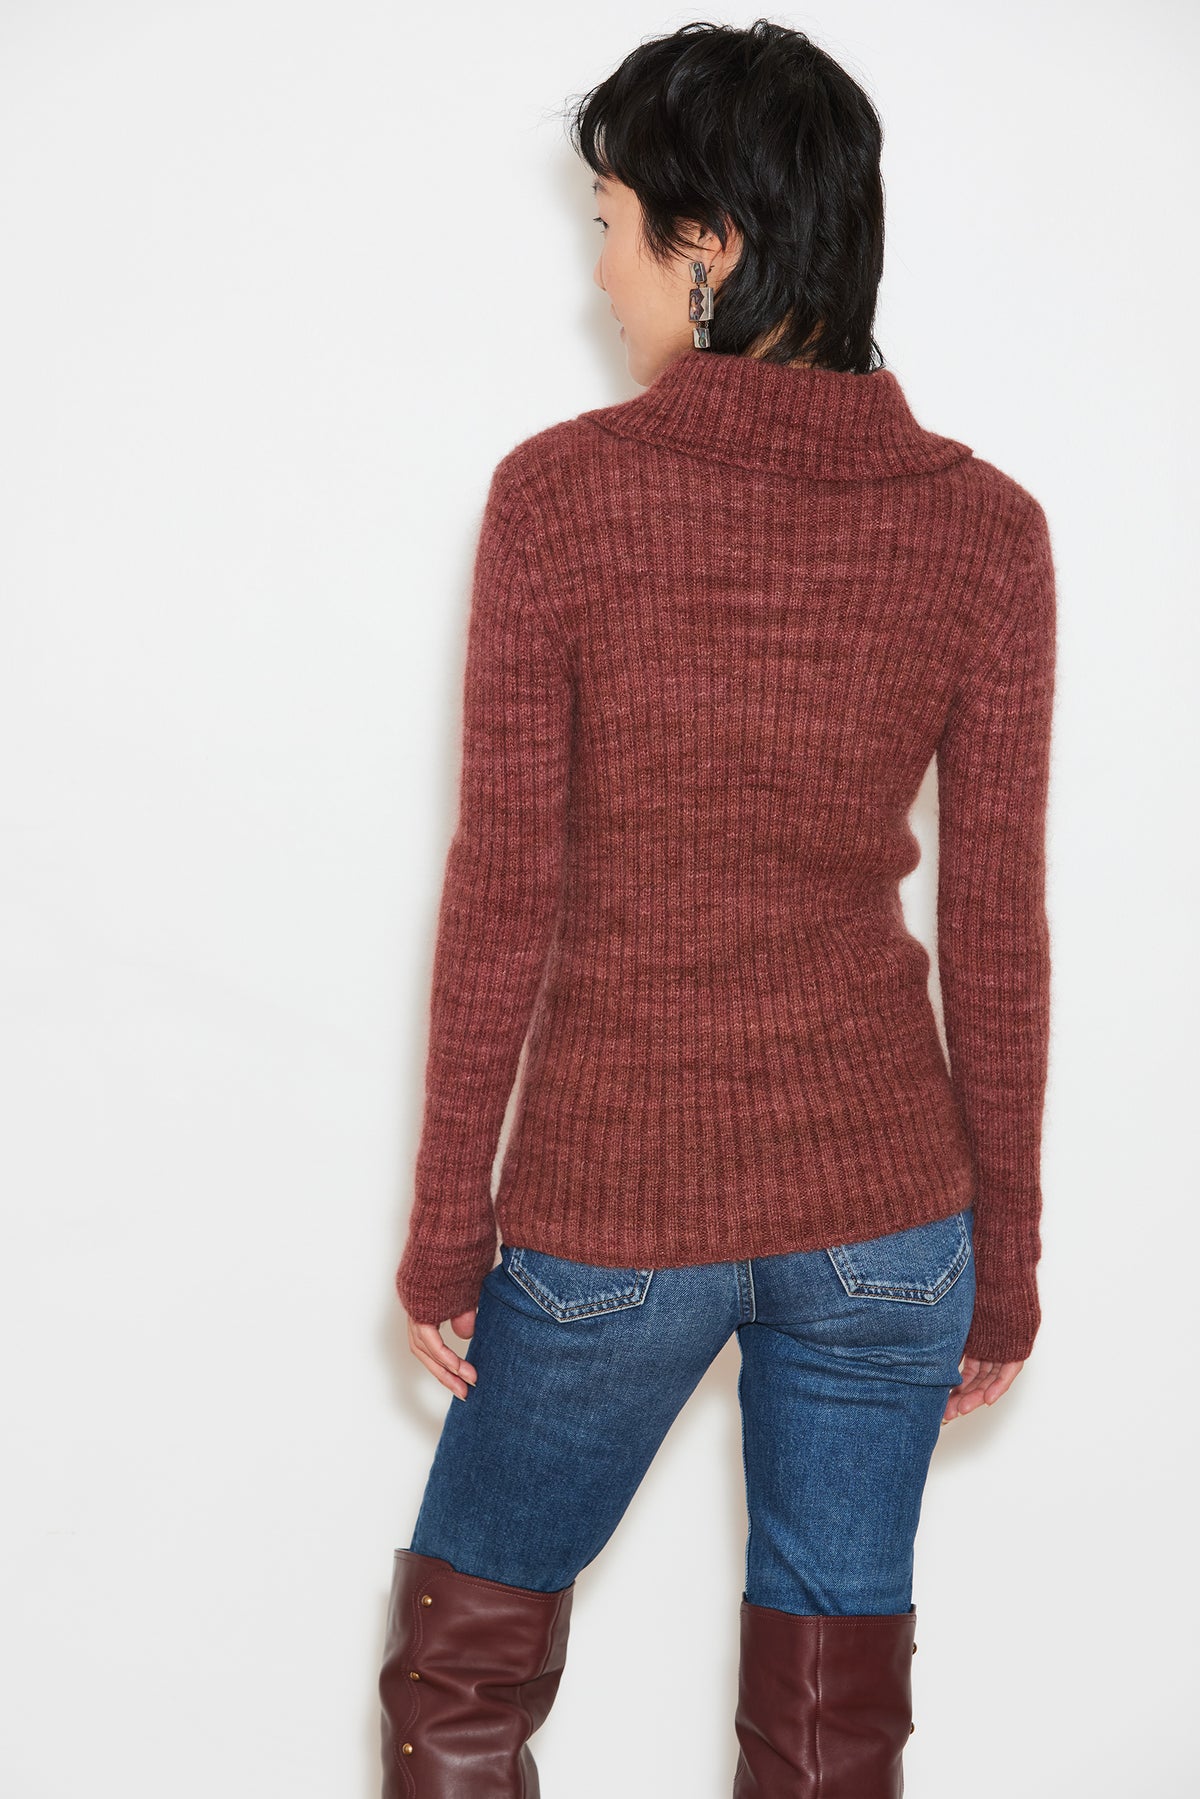 Adult Ines Sweater - Madder Root